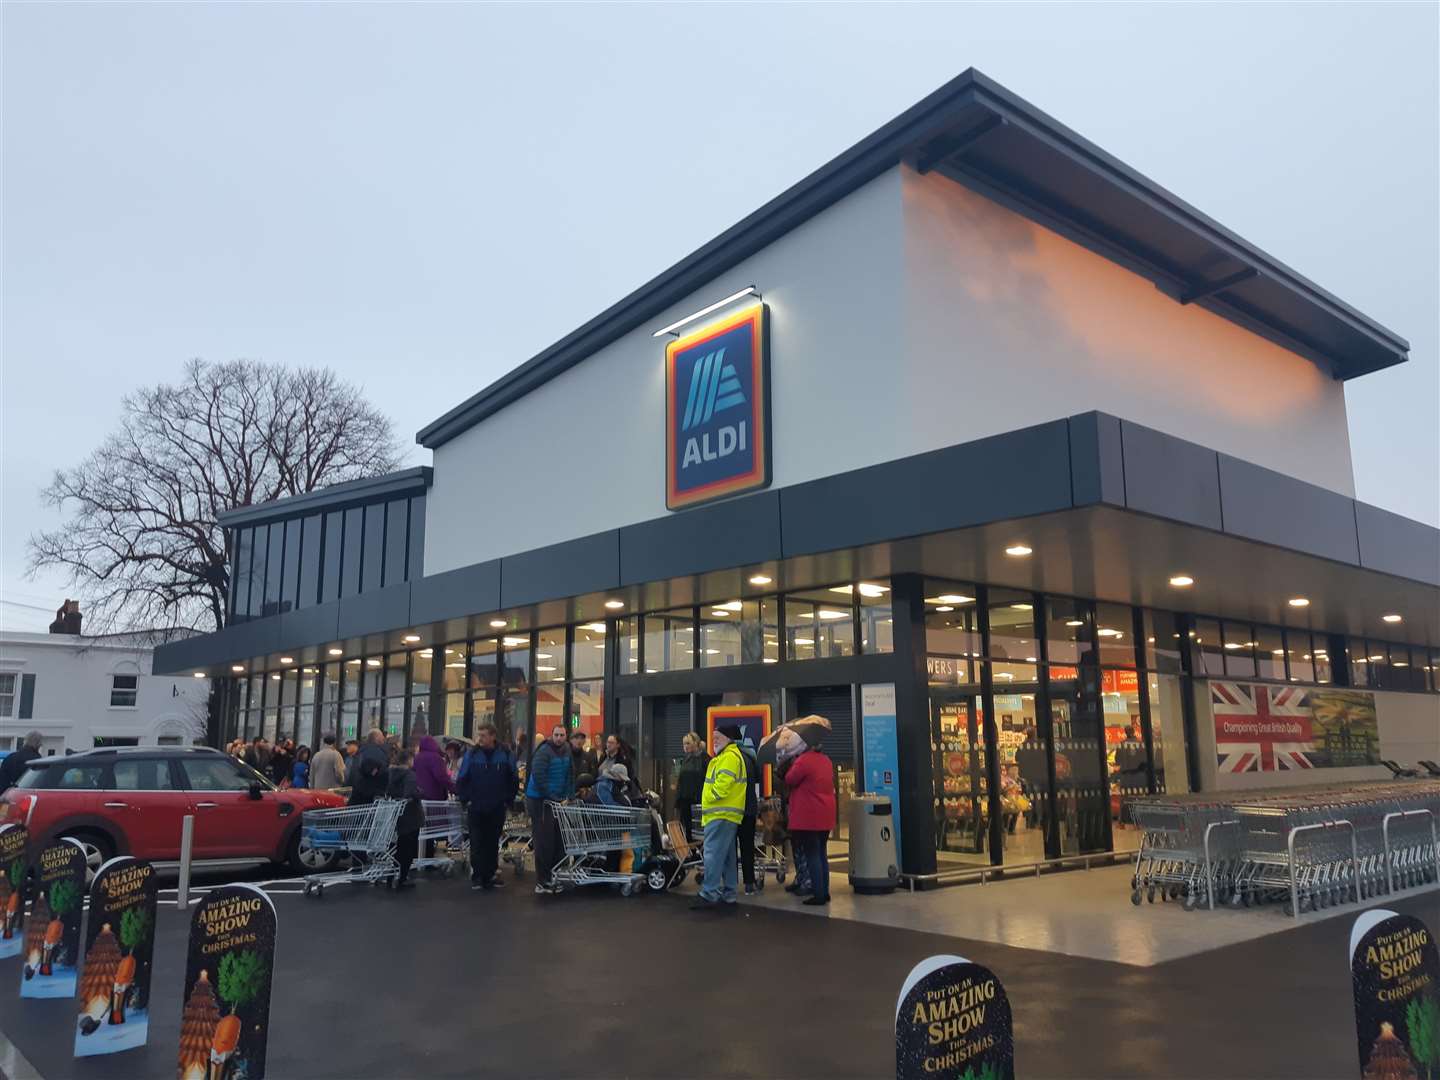 NHS workers can browse the aisles 30 minutes before others every Sunday at Aldi